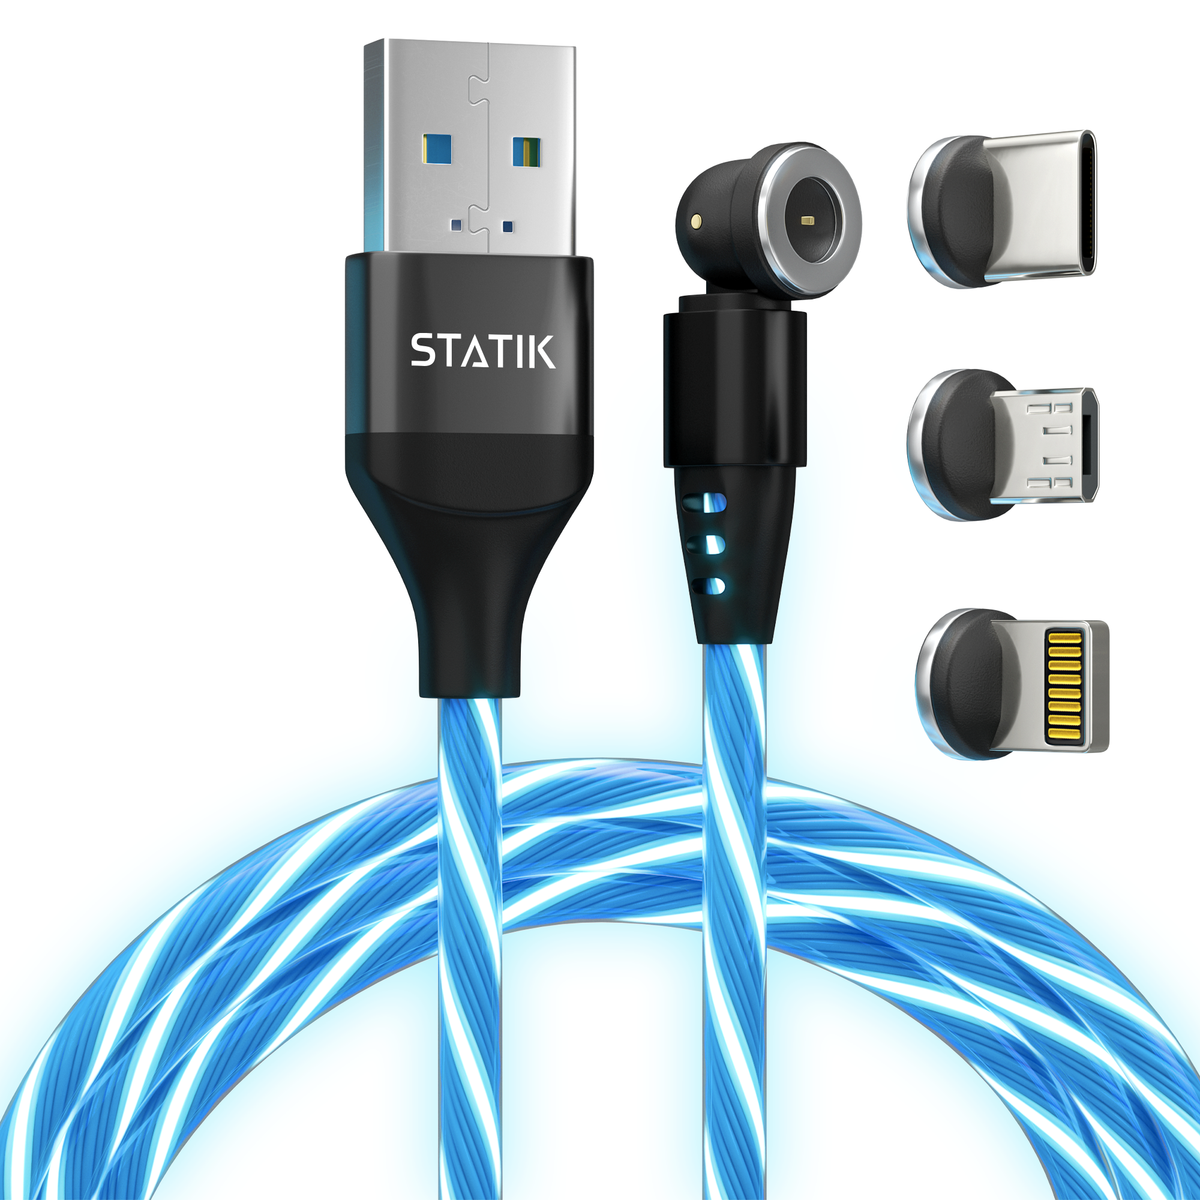 GloBright® 360 Blue | Universal Magnetic Charge Cable